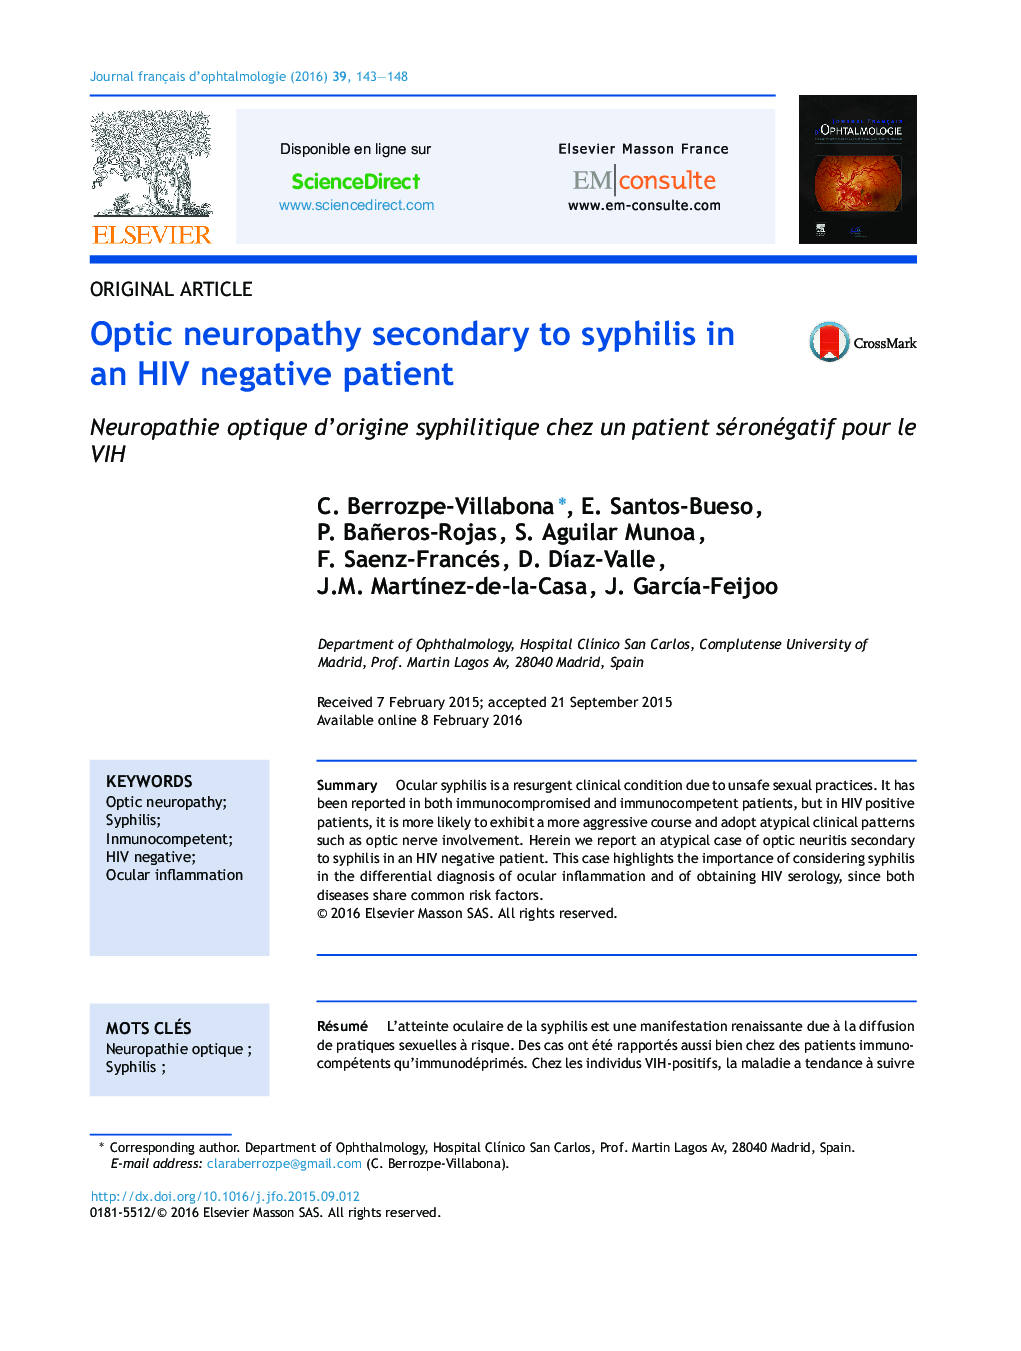 Optic neuropathy secondary to syphilis in an HIV negative patient